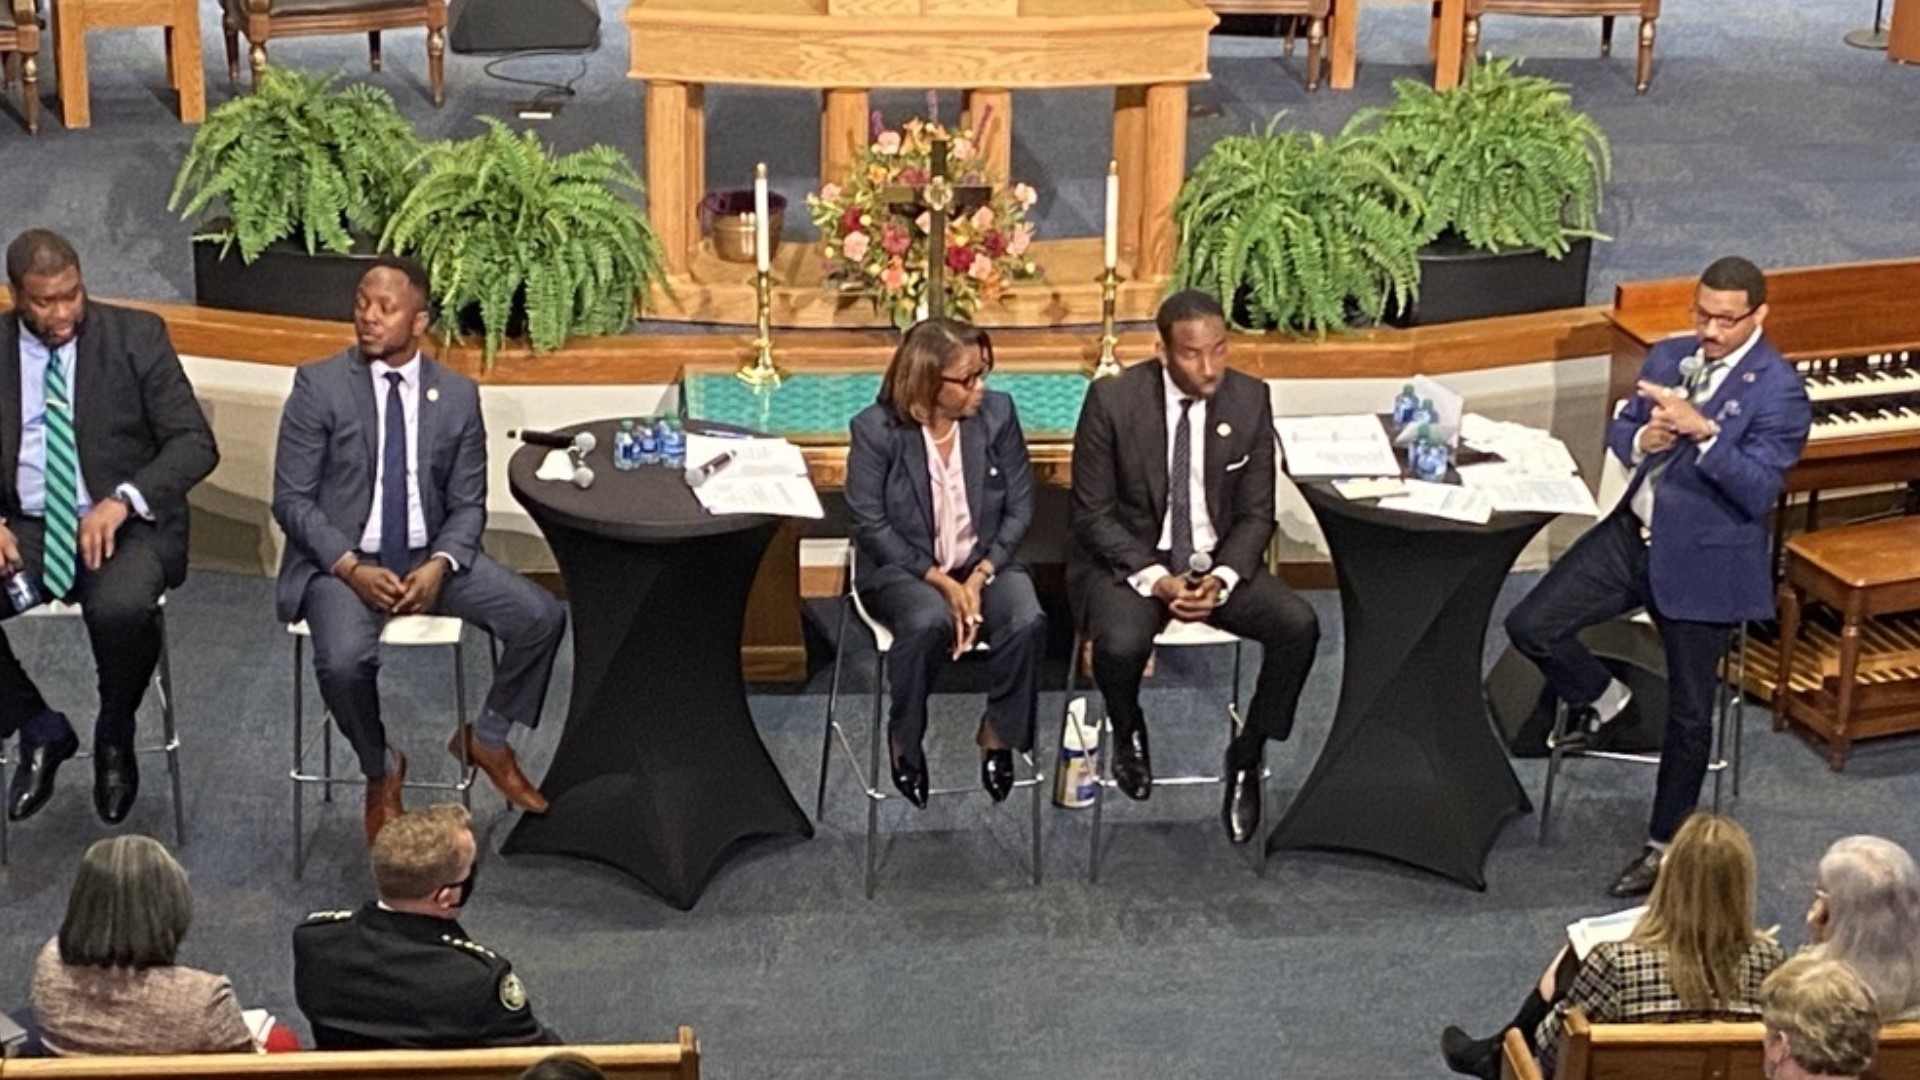 Mayor Andre Dickens faced tough questions – and also got pleas for help from Atlanta residents fed up with crime. It was a big turnout for a town hall meeting.